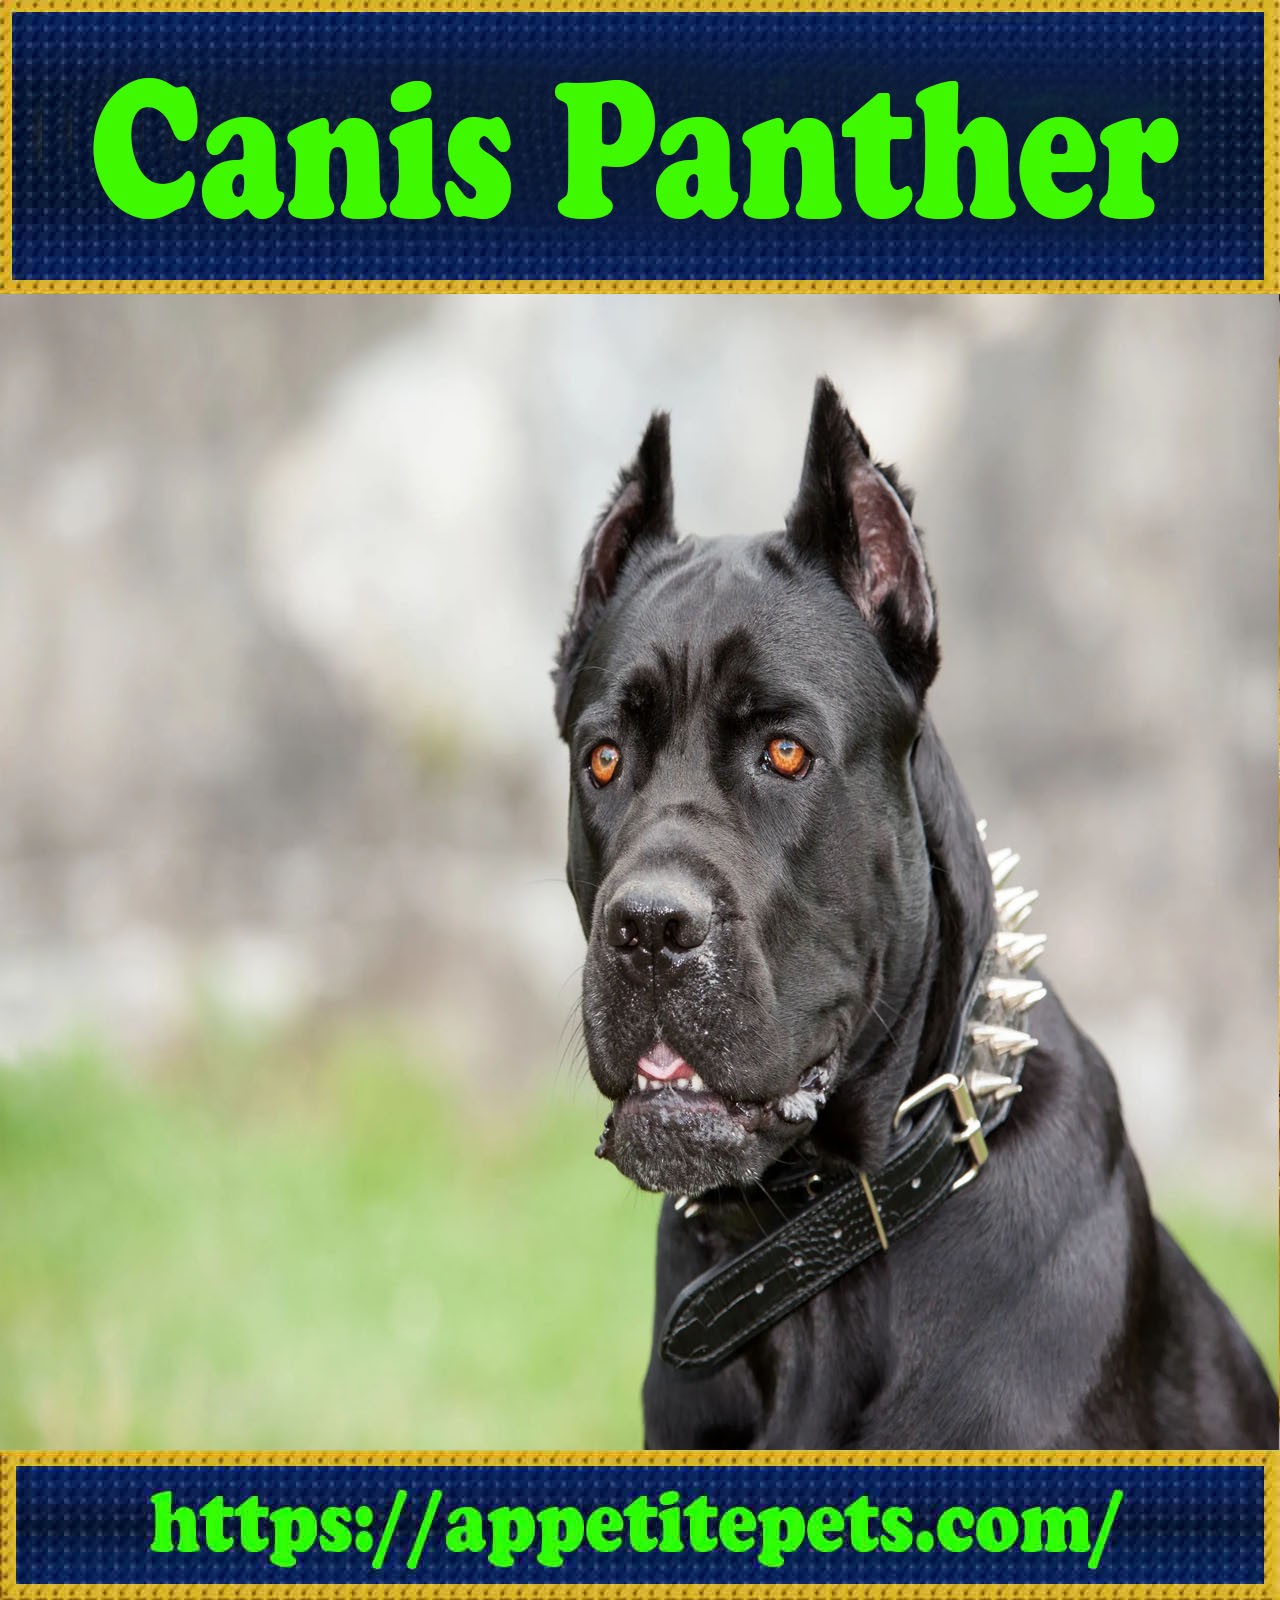 Canis Panther